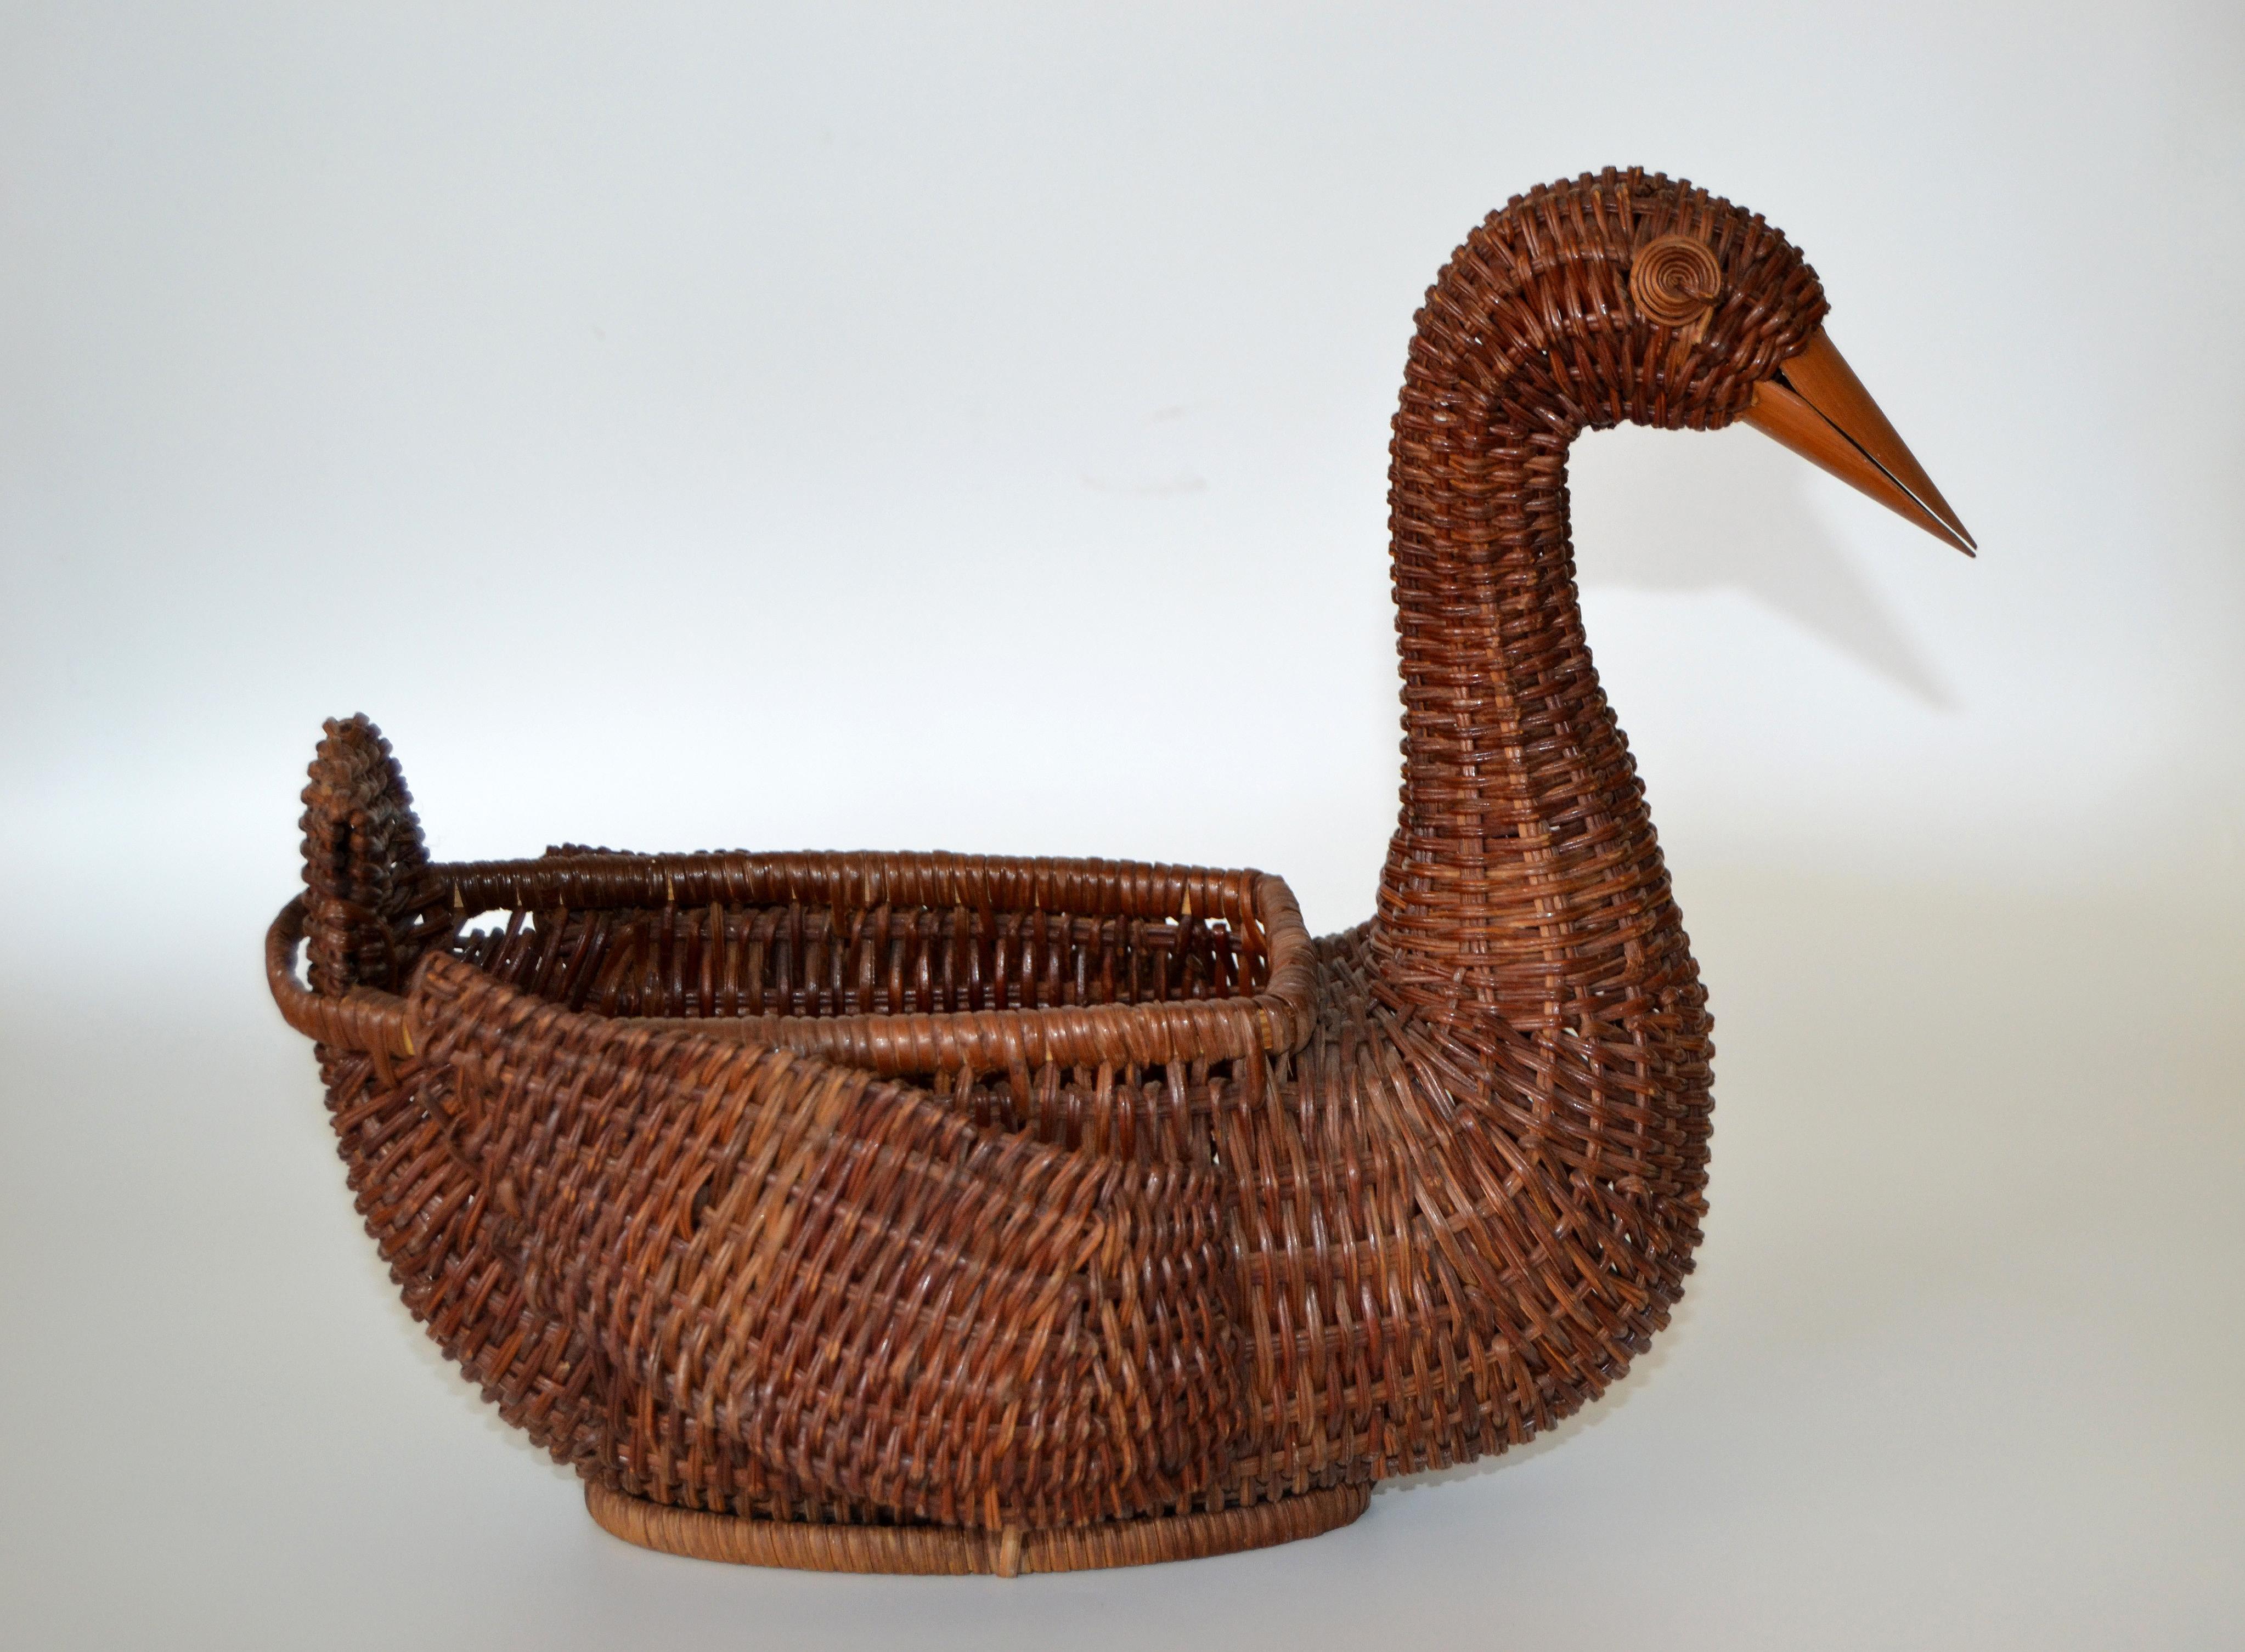 Boho chic decorative handcrafted woven reed Brown Duck shaped basket. 
Great unique form and shape made out of natural materials, an accent piece for any decor.
 